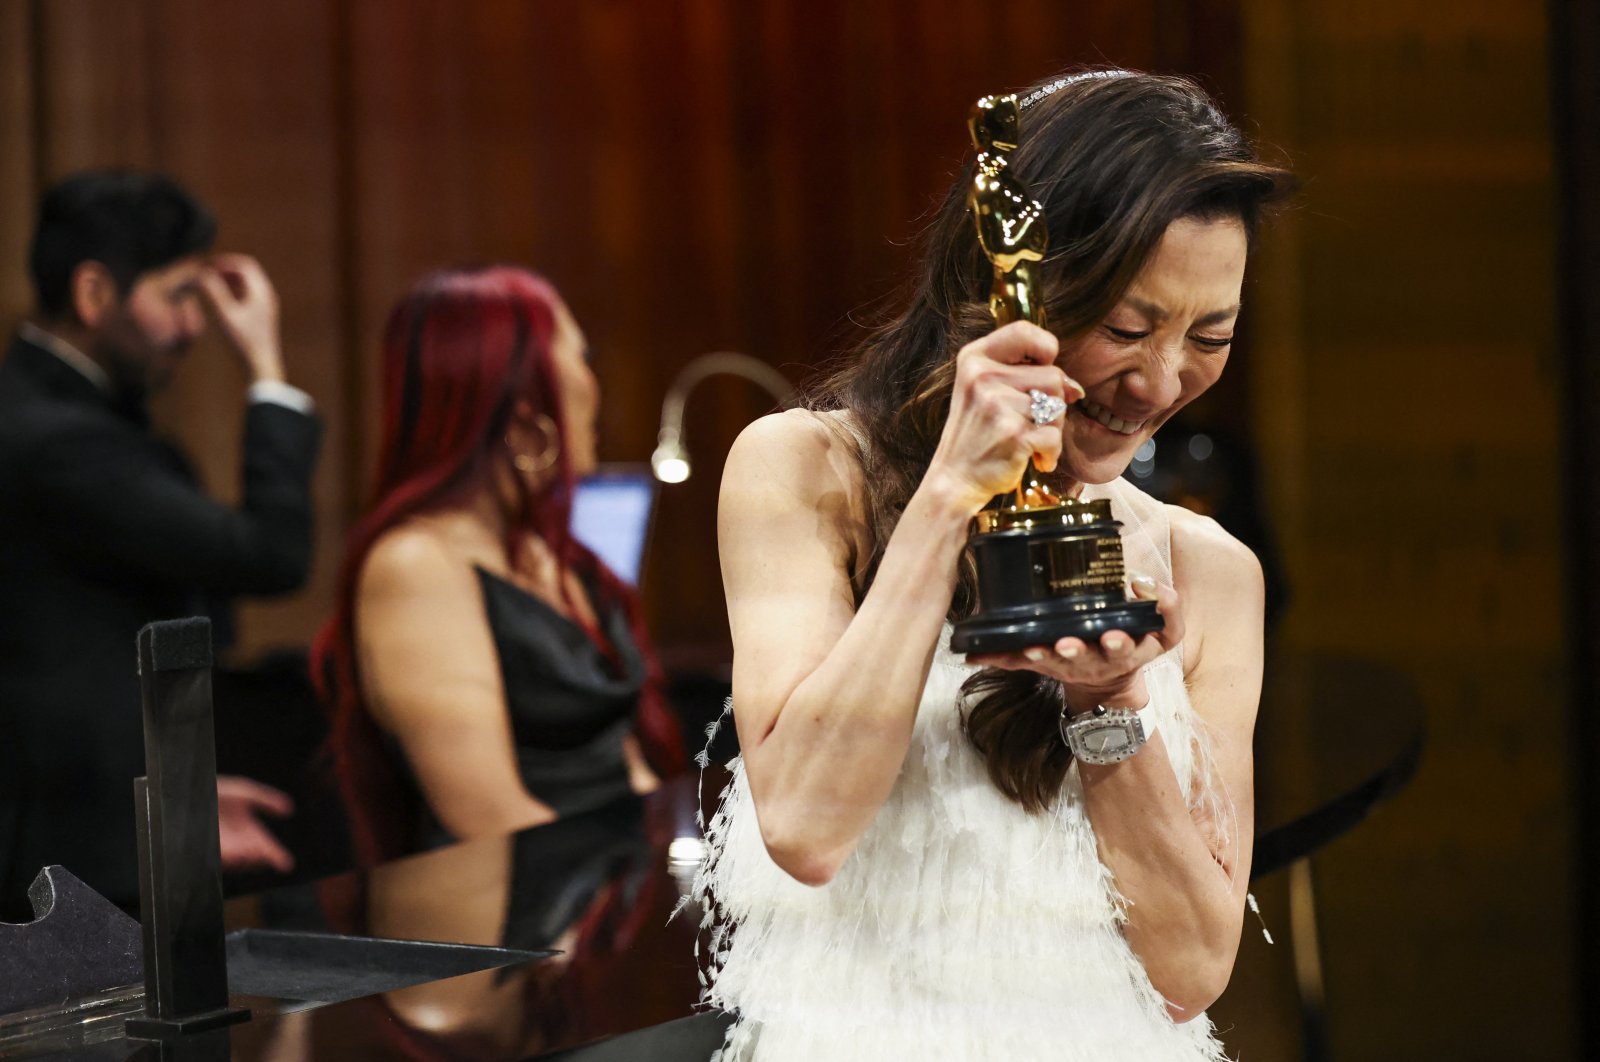 Best Actress Michelle Yeoh reacts after having her Oscar engraved at the Governors Ball following the Oscars show at the 95th Academy Awards in Hollywood, Los Angeles, California, U.S., March 12, 2023. (Reuters Photo)